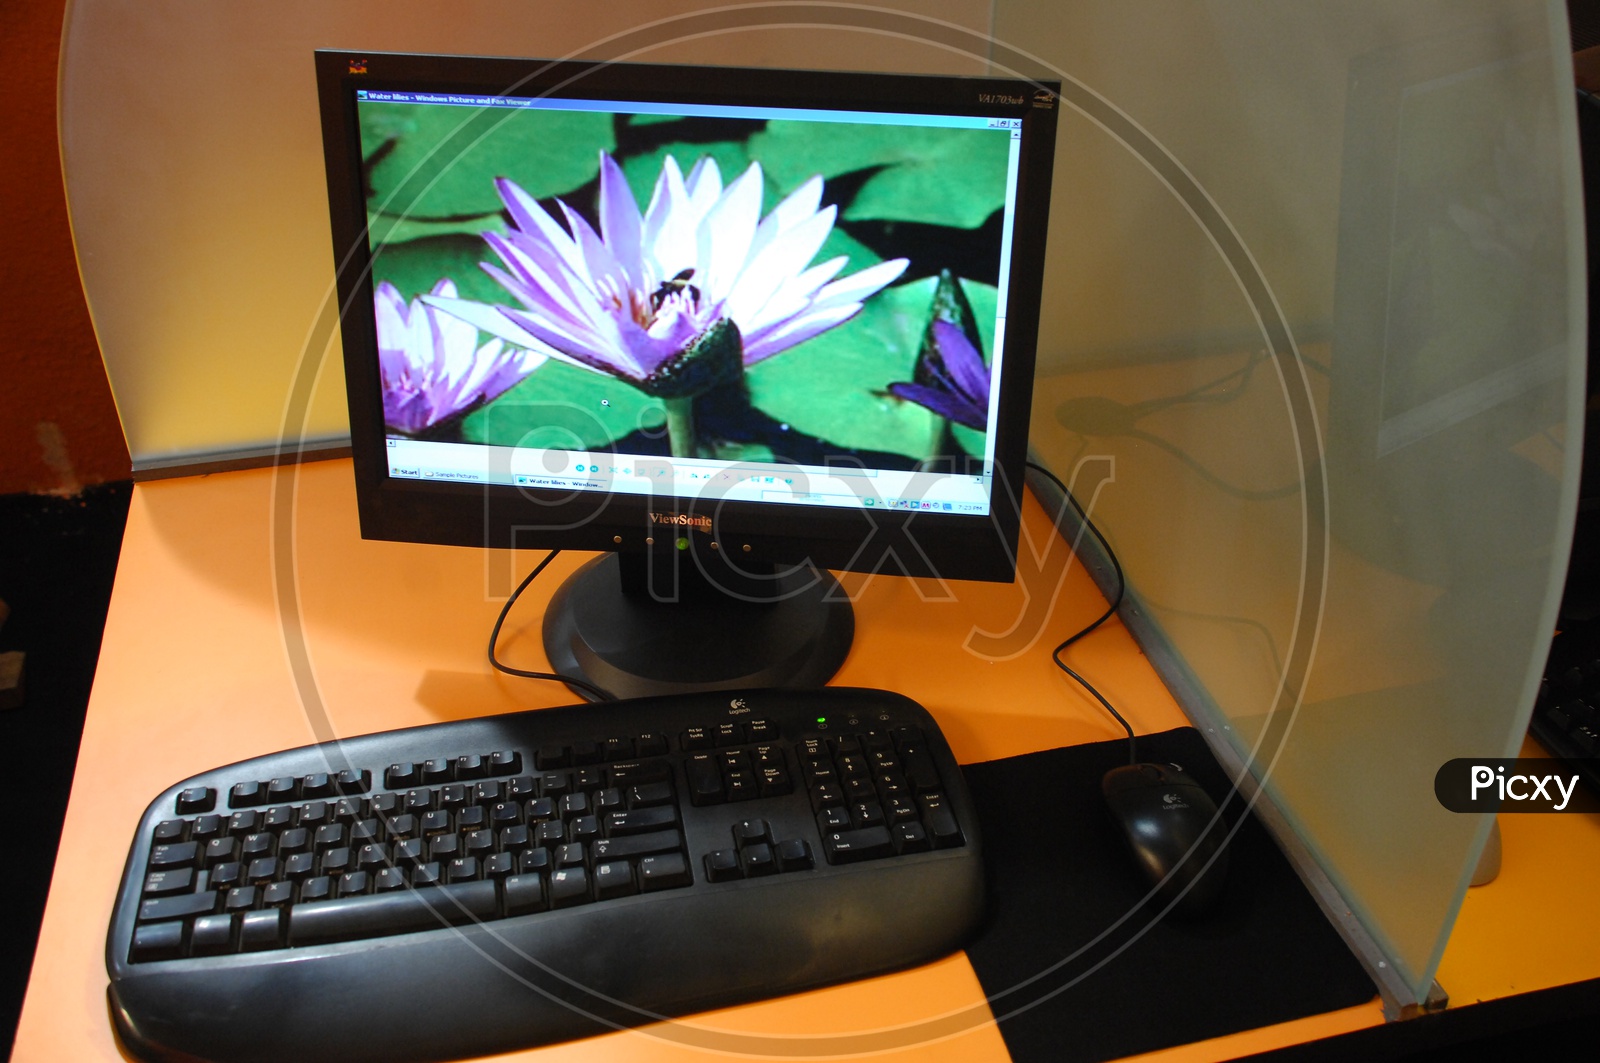 Desktop Computer with a Keyboard and Mouse